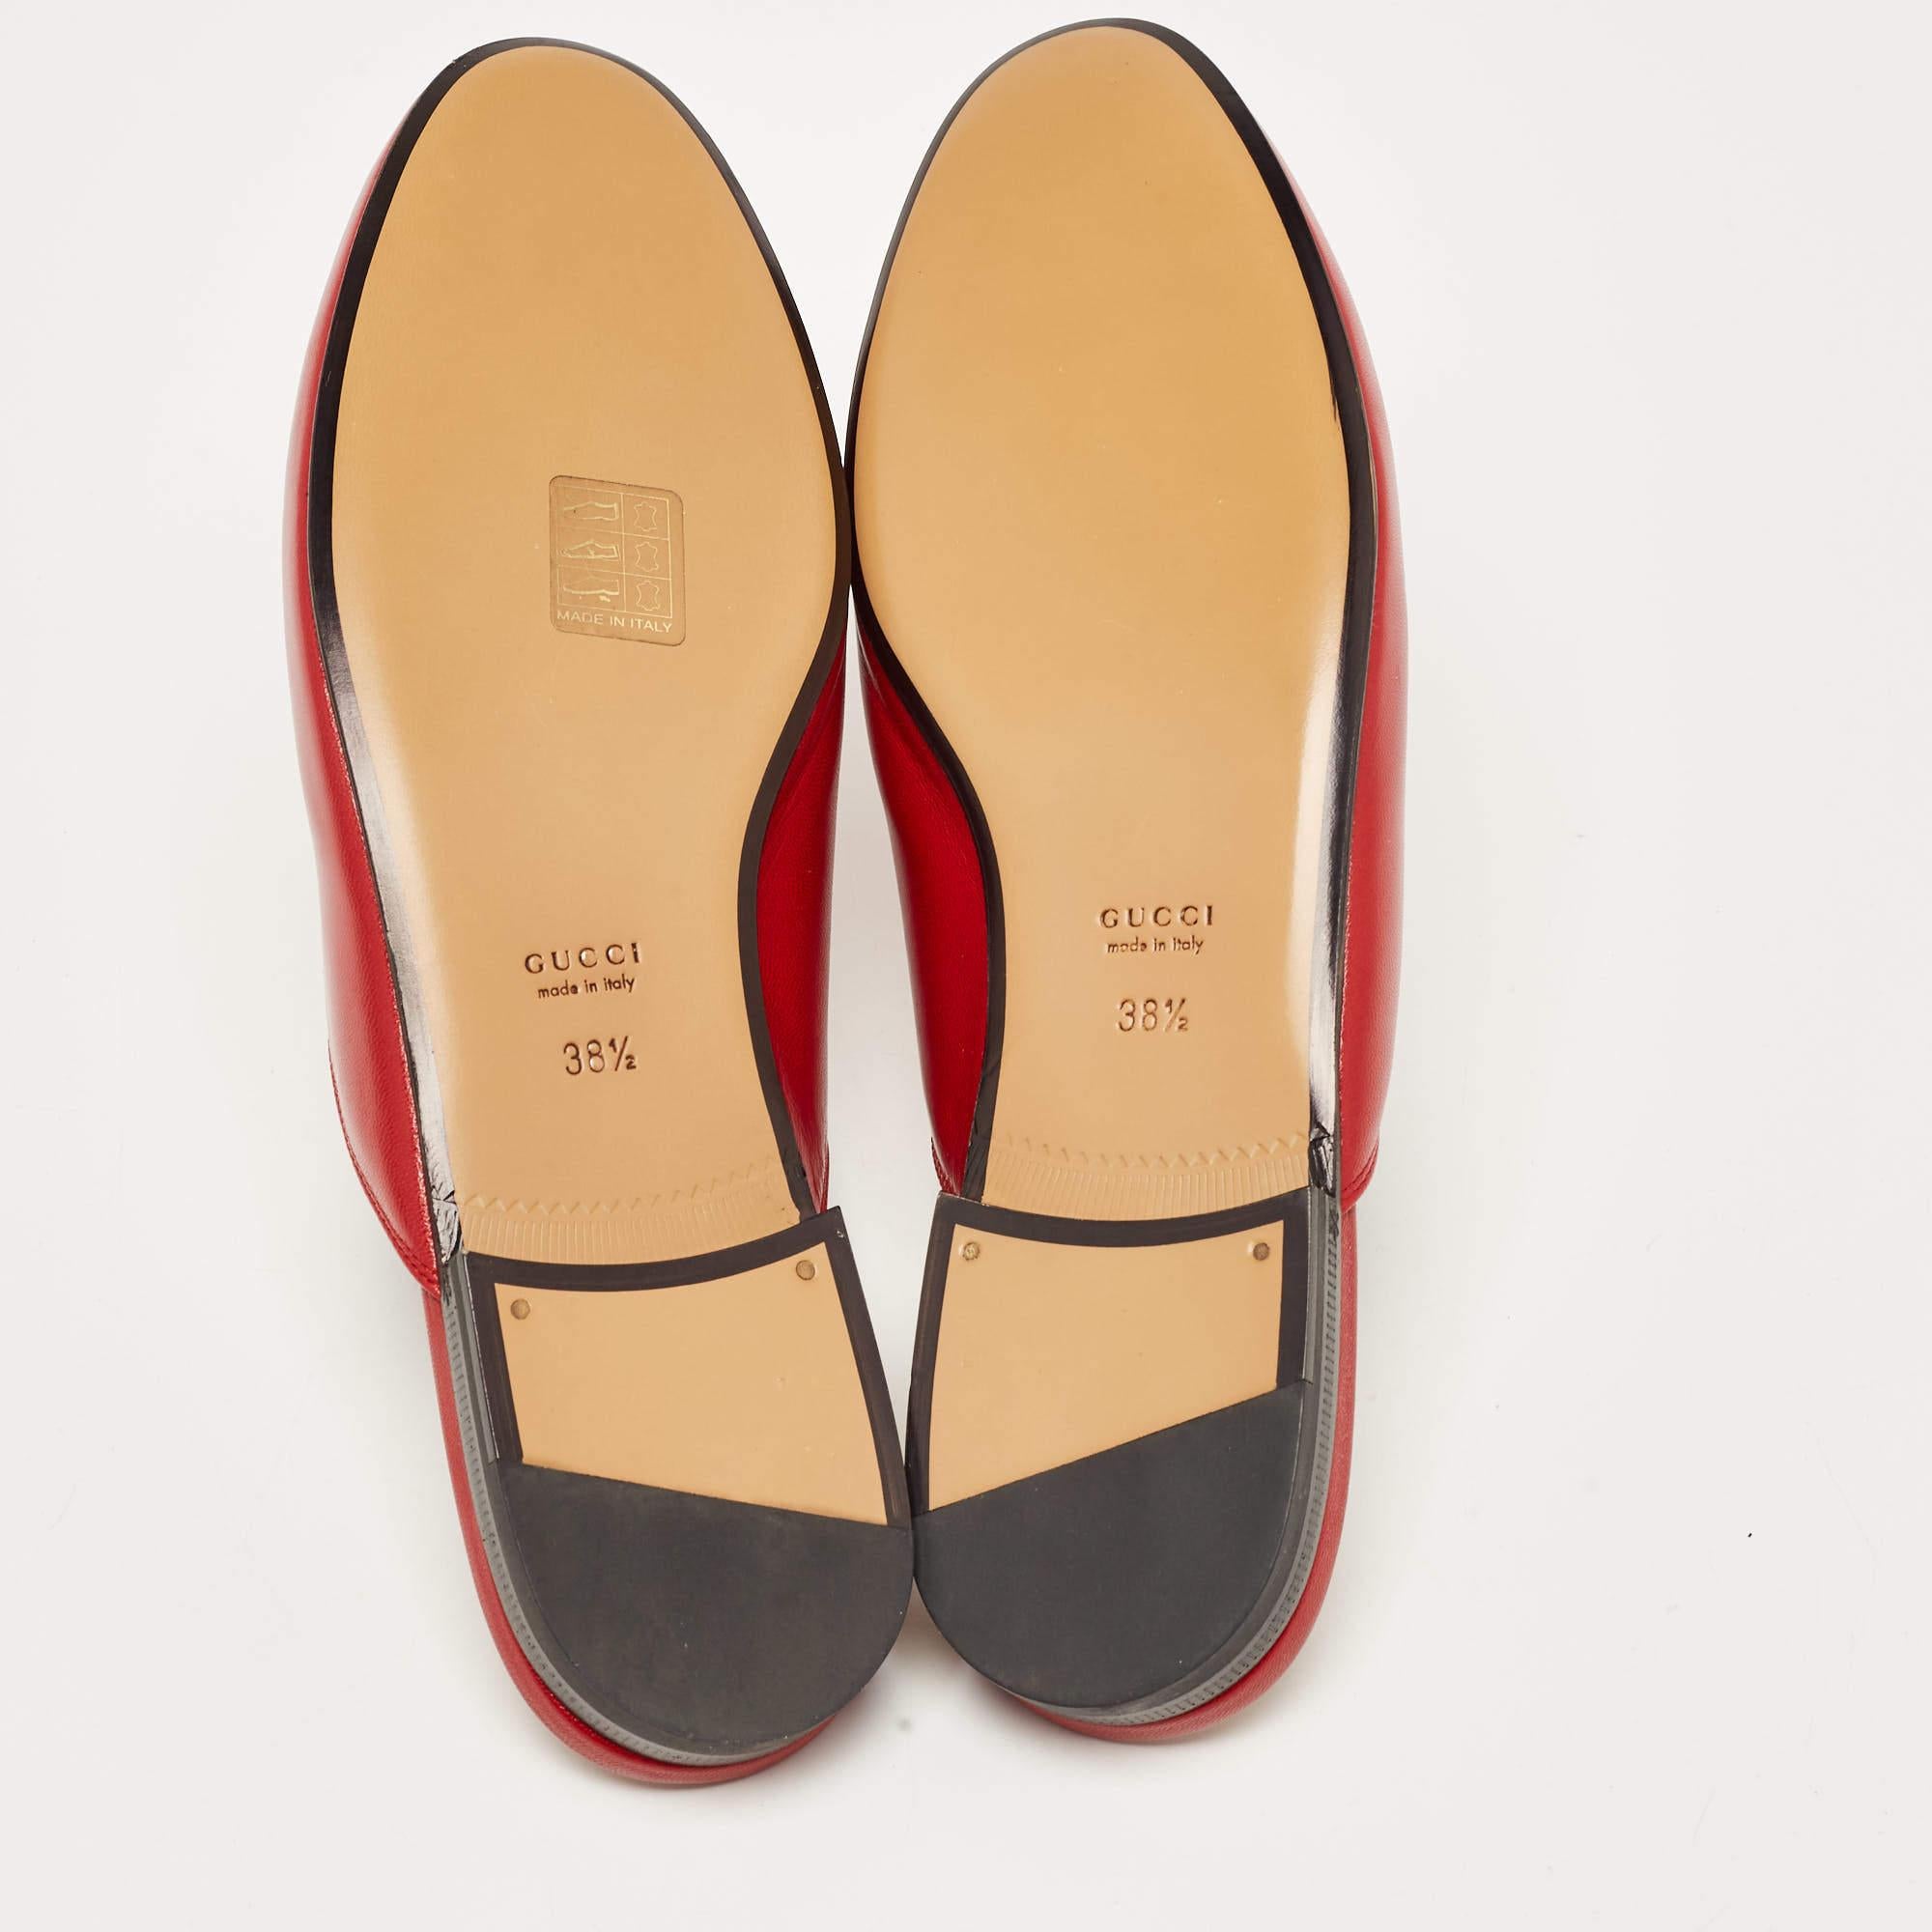 Gucci Red Leather Princetown Flat Mules Size 38.5 4